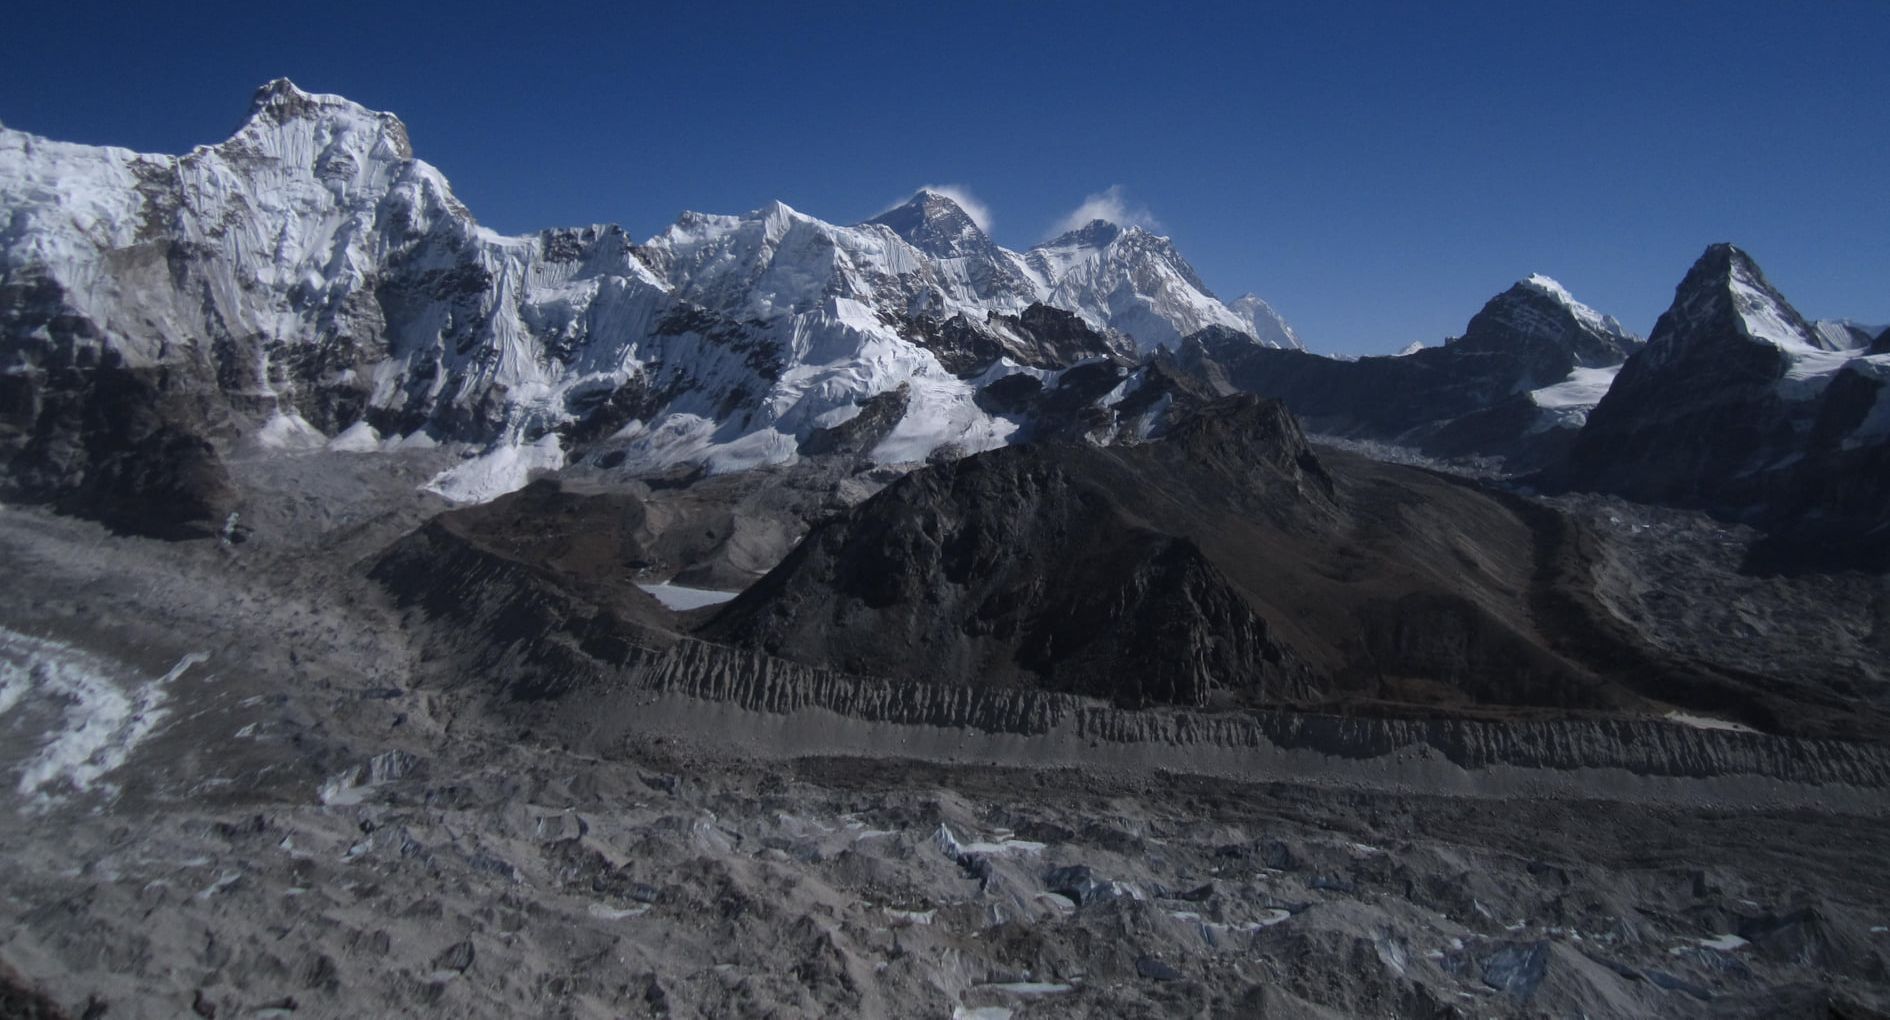 Cha Kung and Everest from Ngozumpa Glacier in Gokyo Valley